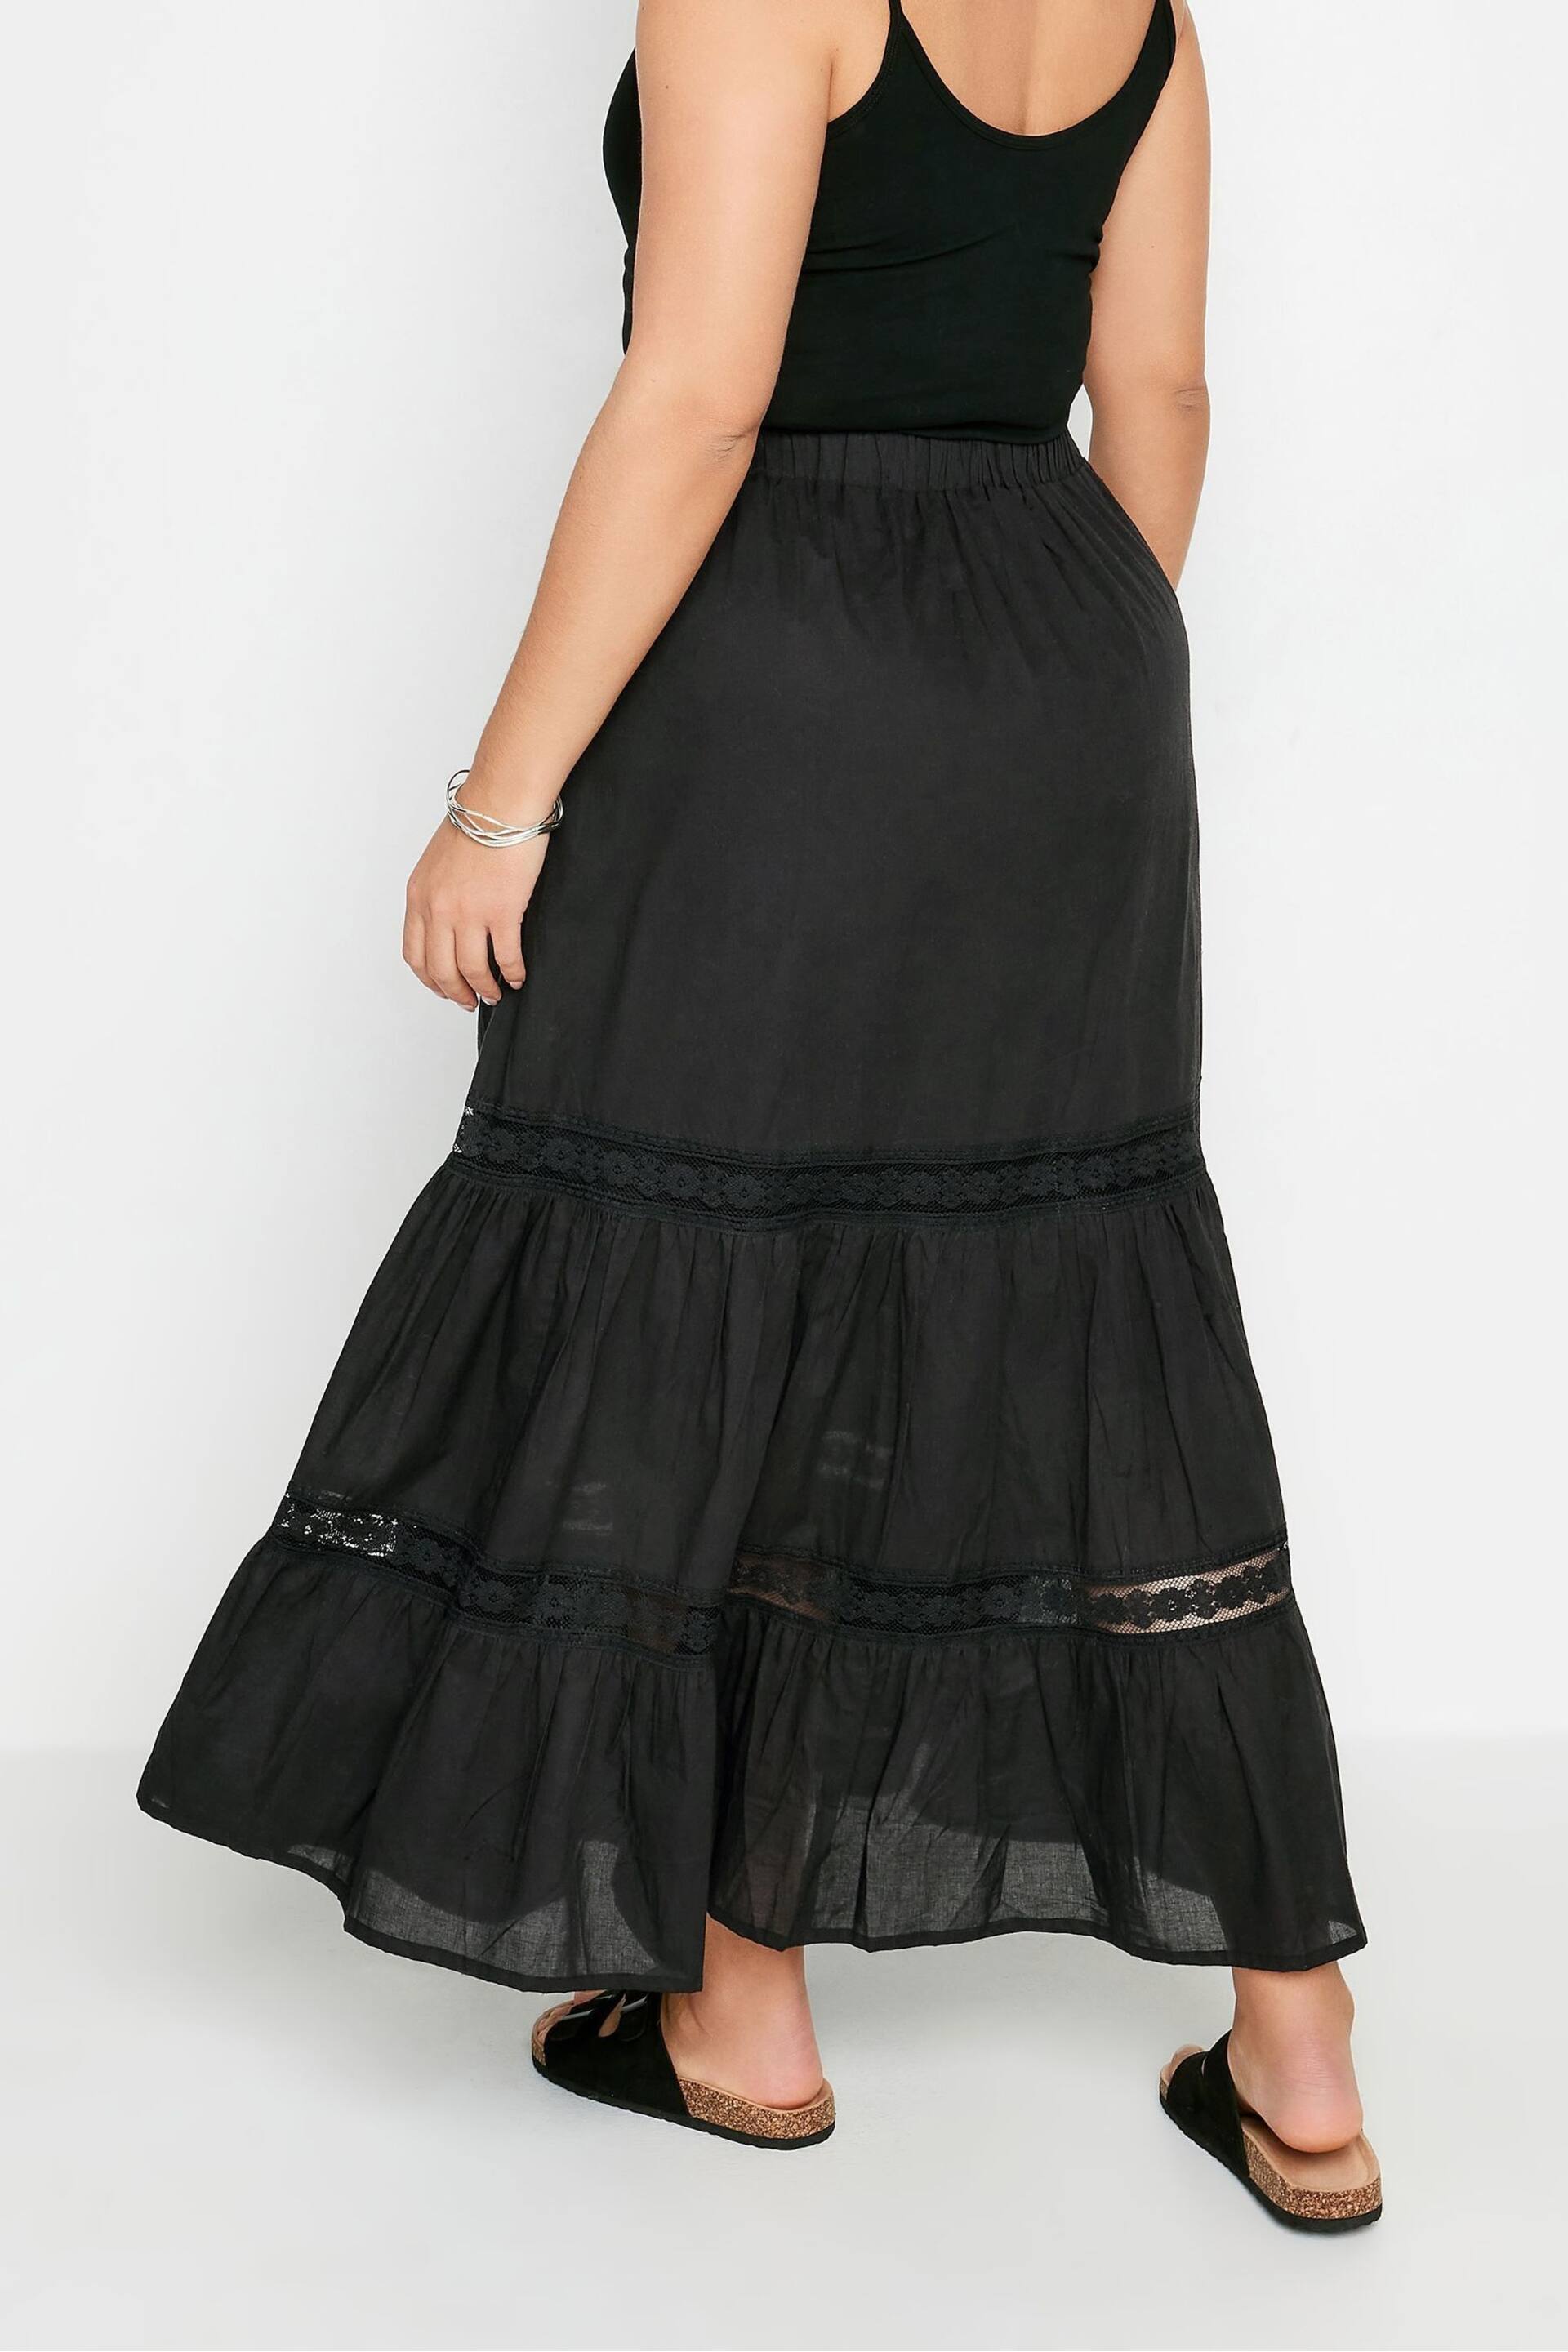 Yours Curve Black Peasant Tiered Maxi Skirt - Image 3 of 5